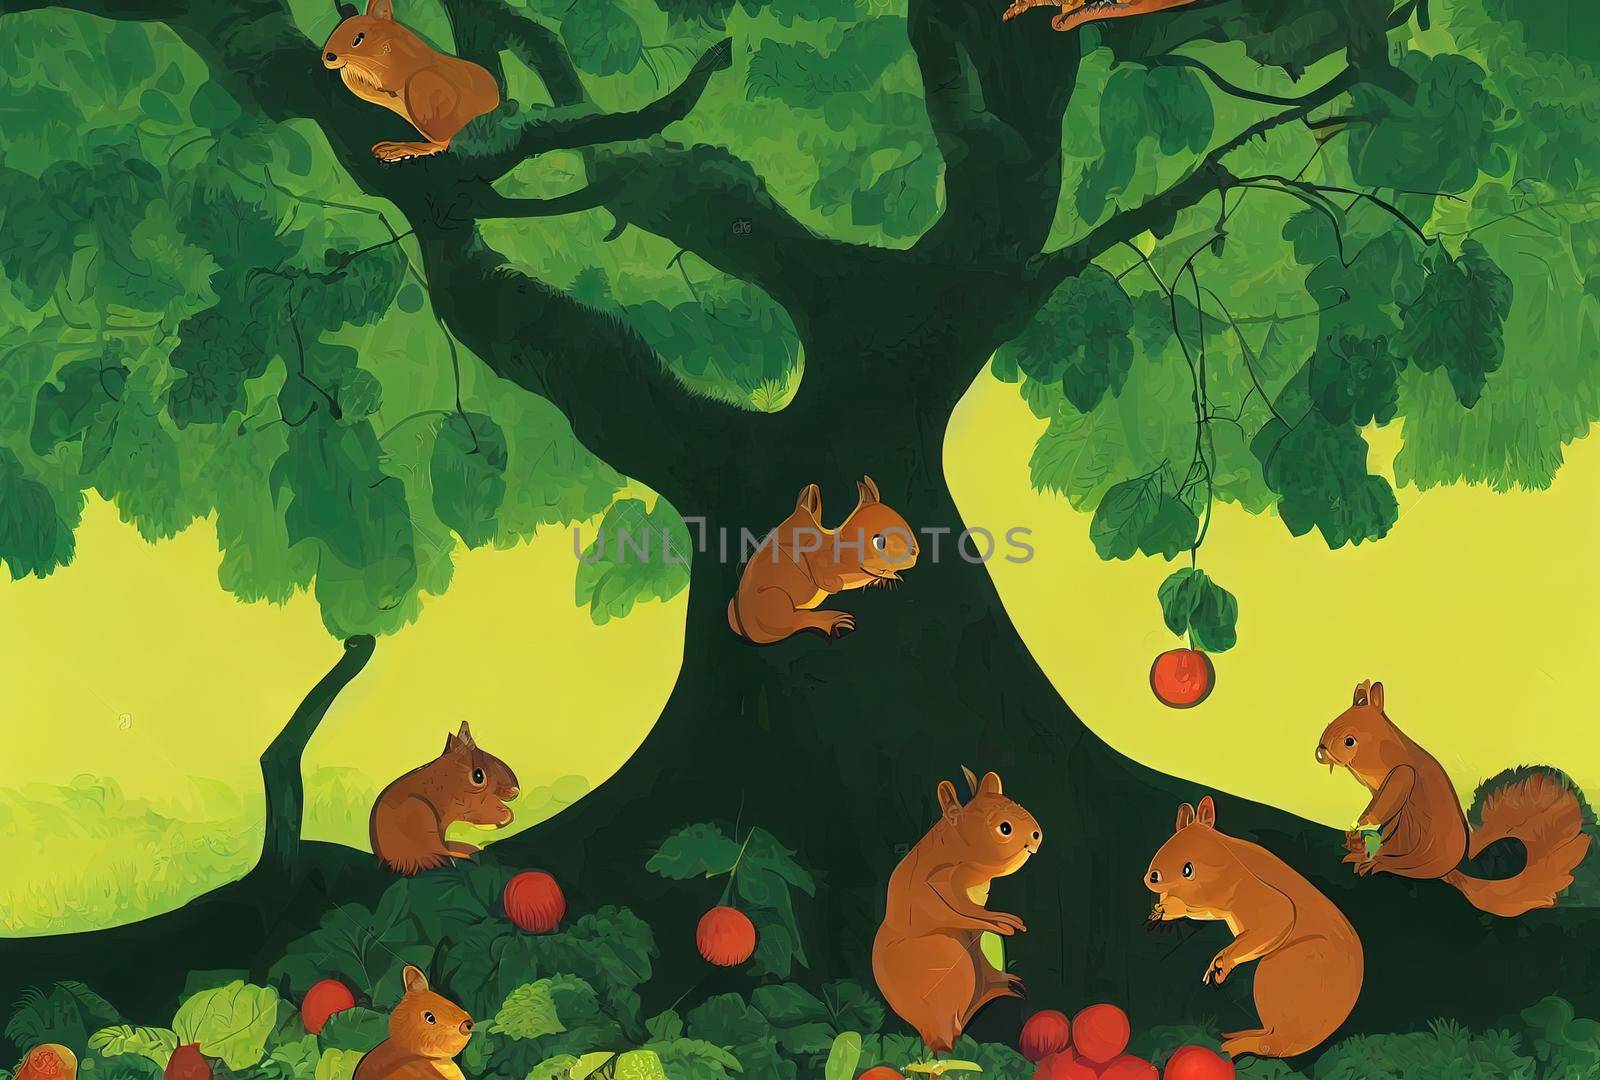 Squirrels stocking hazelnuts in a big hollow trunk of tree in forest, wallpaper illustration for children with green nature and wild woods. animals background for kids.